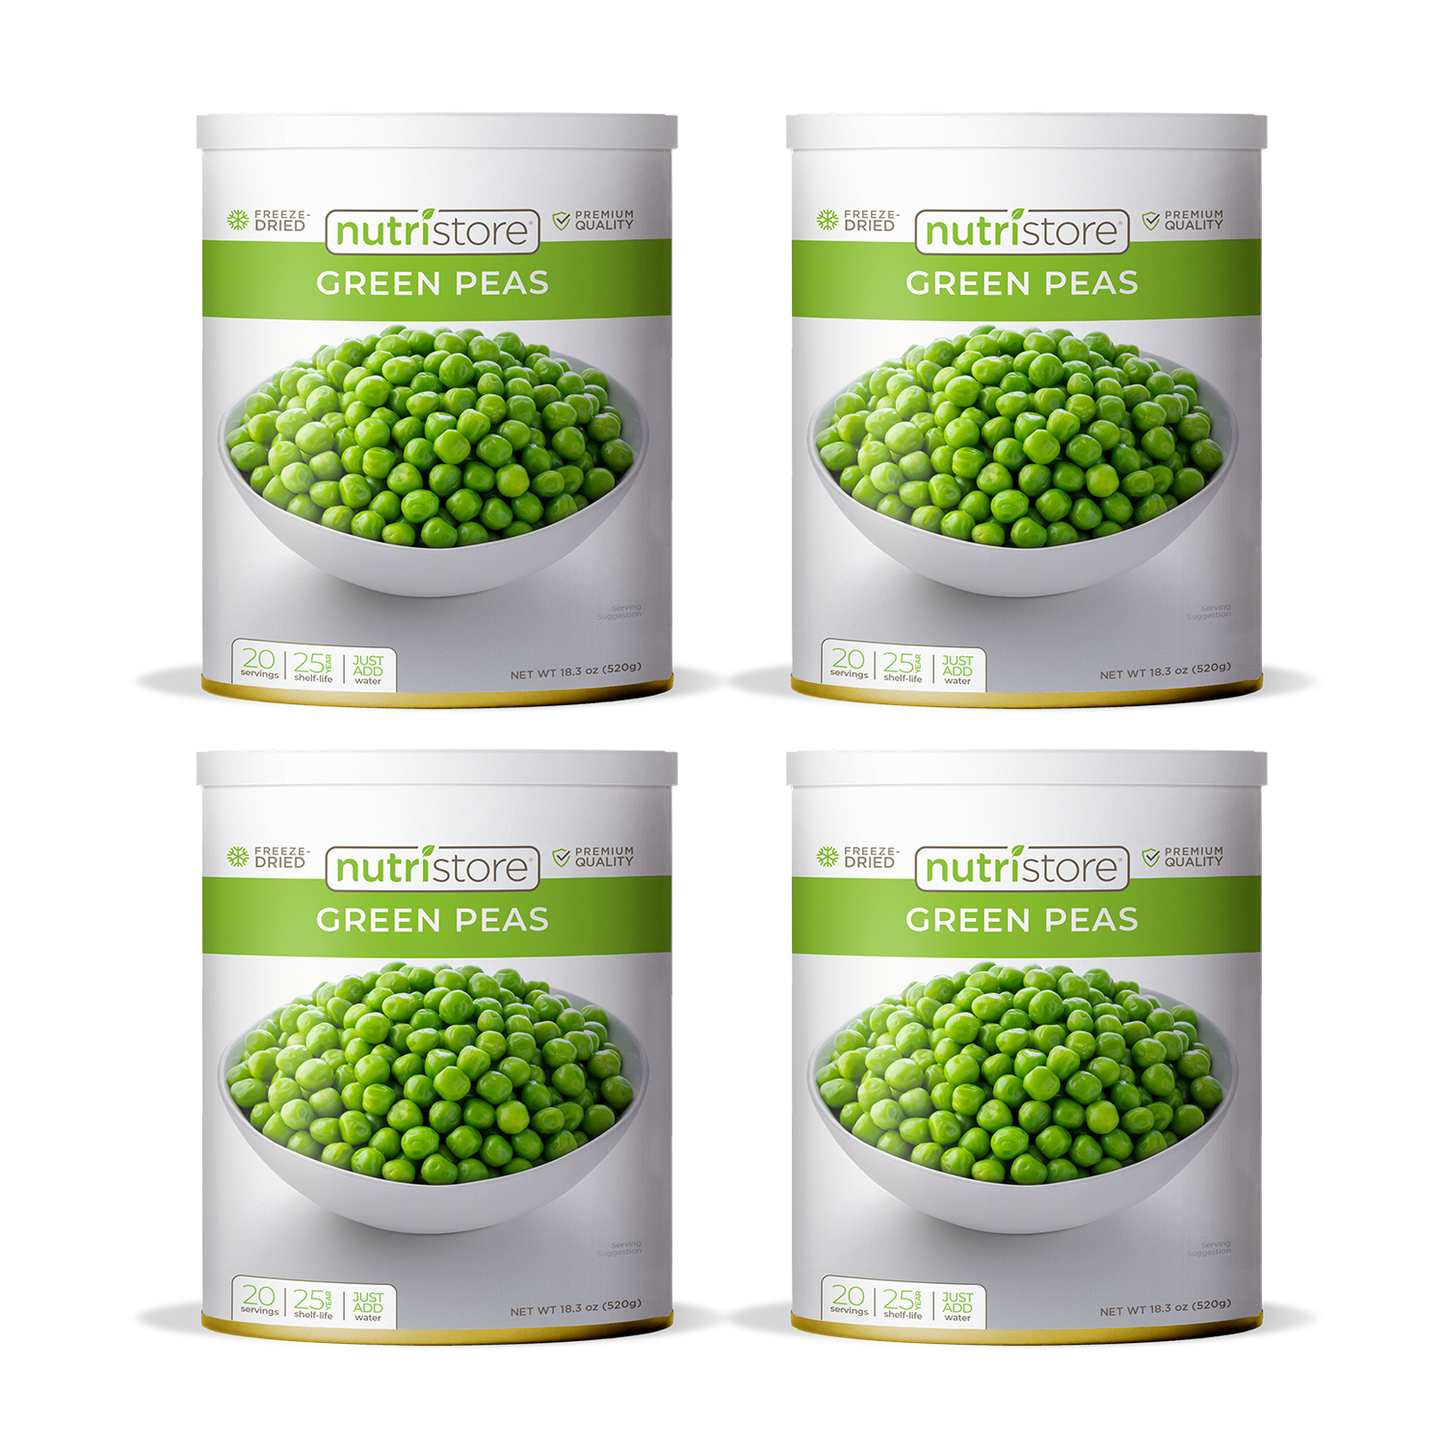 Green Peas Freeze Dried - #10 Can by Nutristore